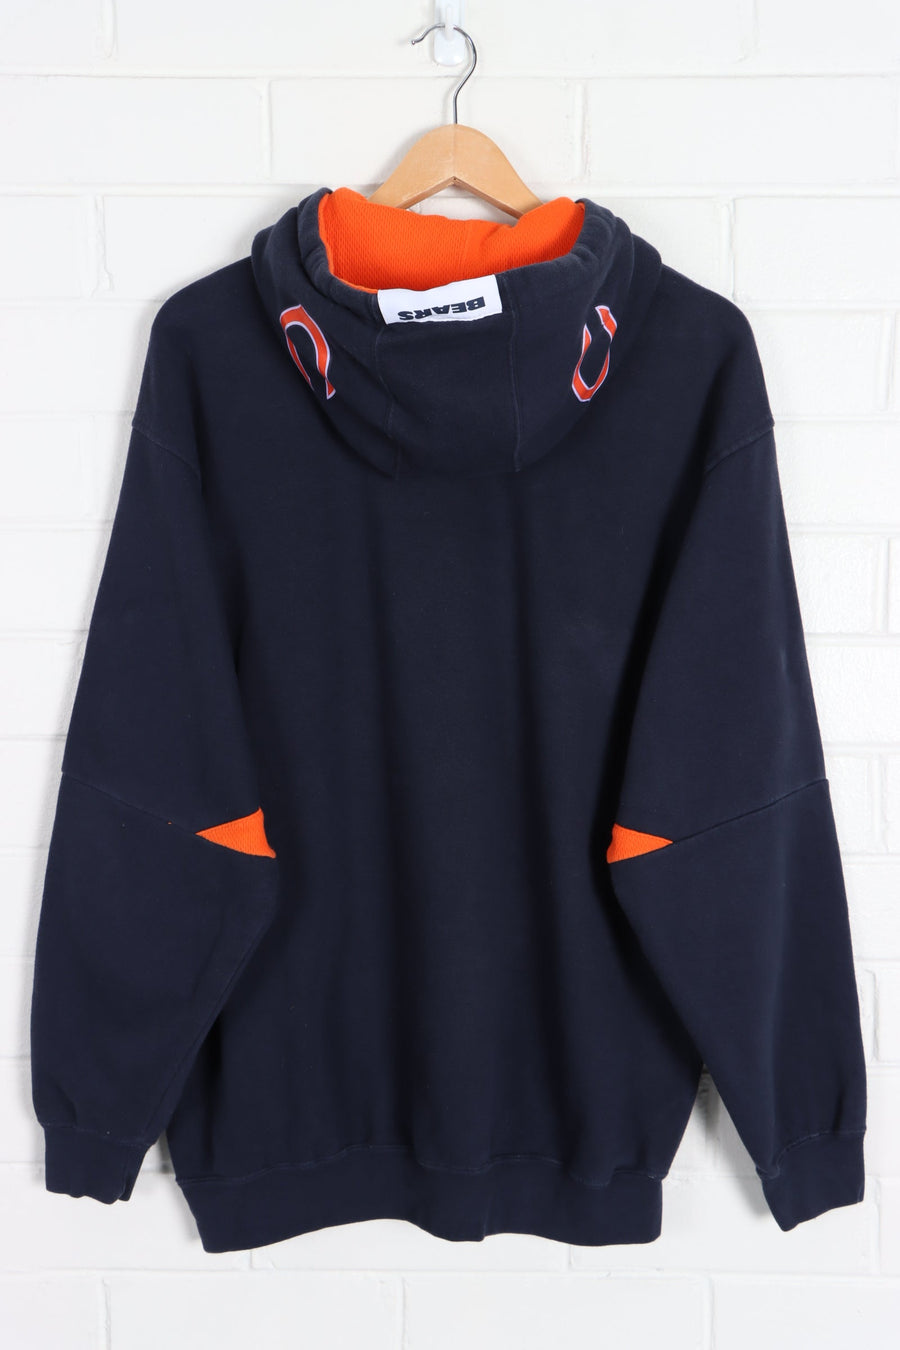 NFL Chicago Bears Spell Out Hoodie with Sleeve Pocket (L)